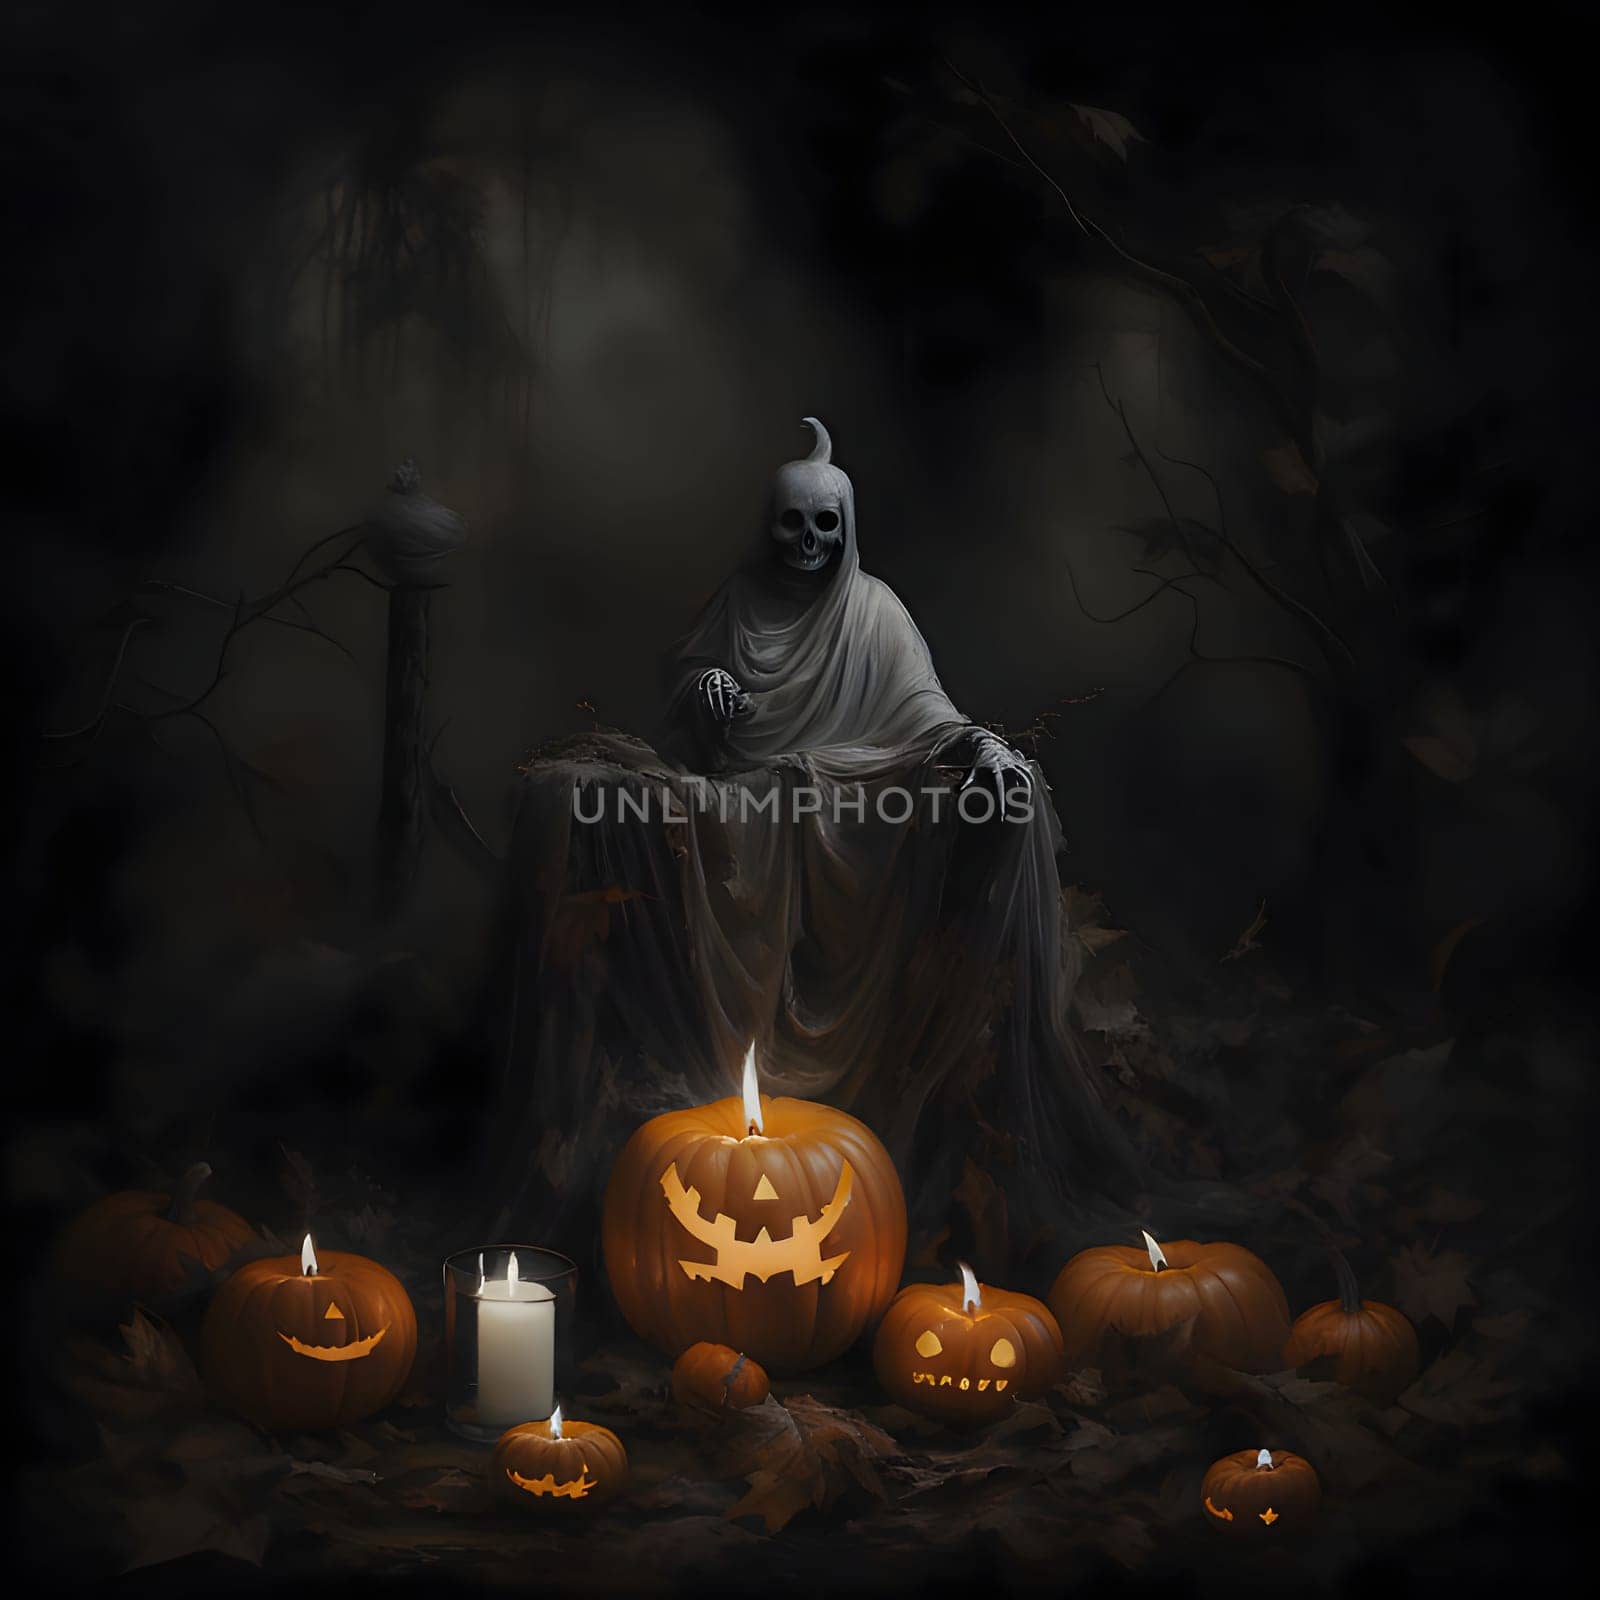 Dark statue and burning candle-pumpkins, a Halloween image. Atmosphere of darkness and fear.